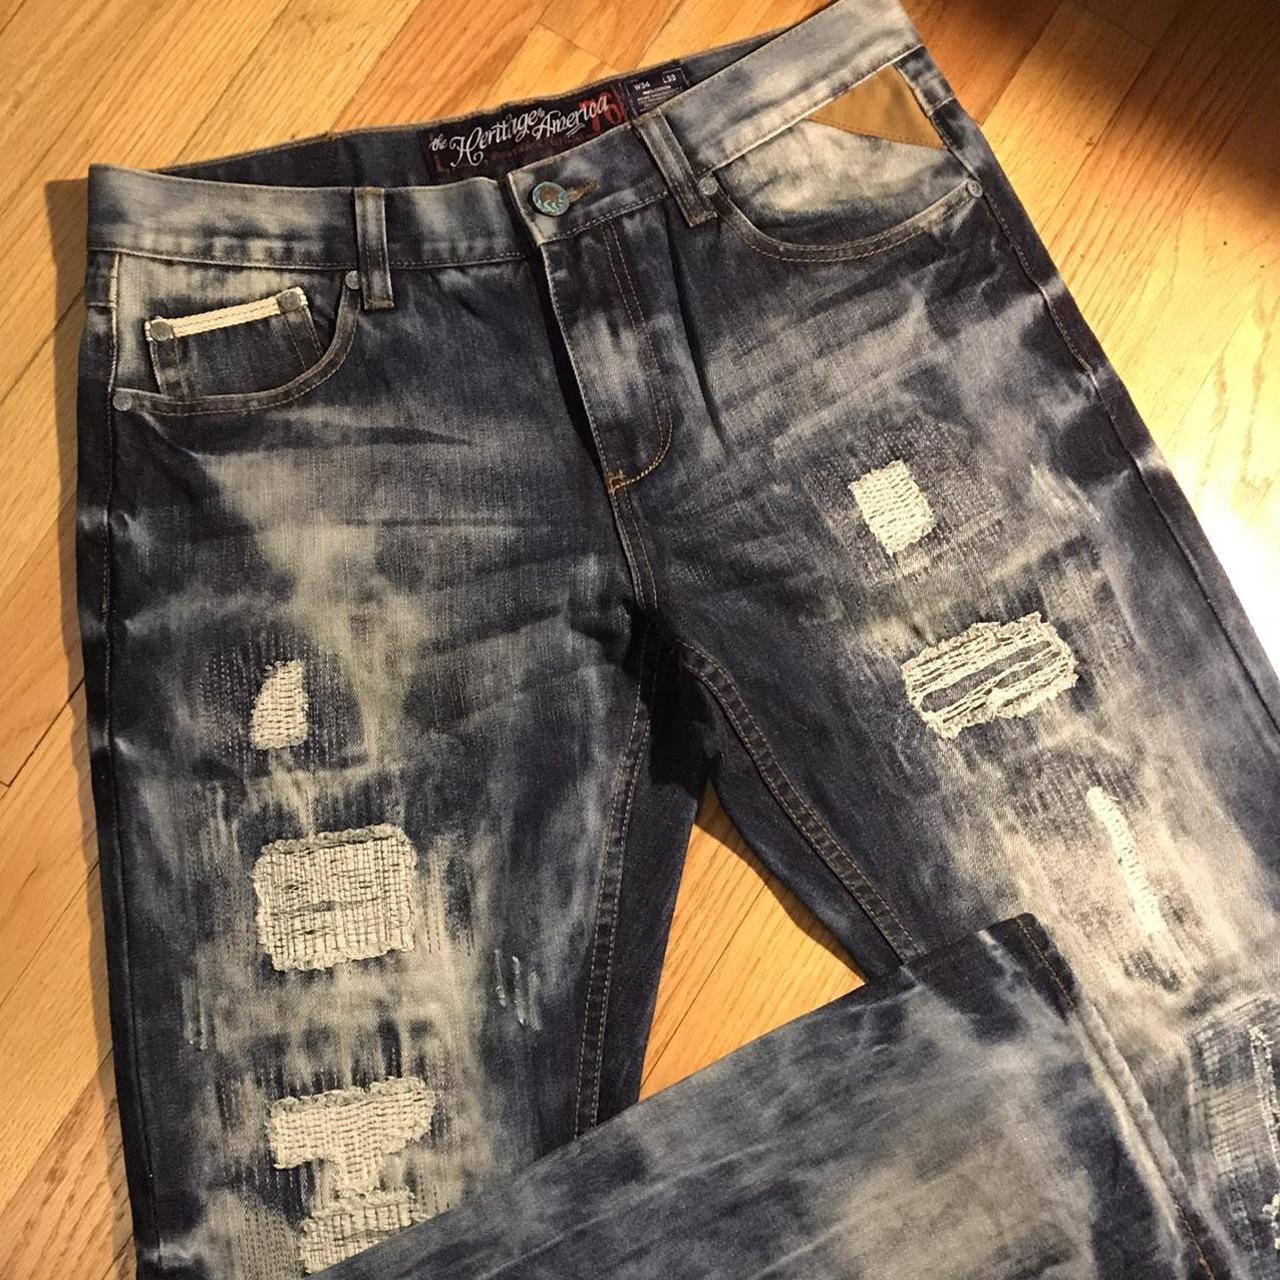 American Heritage Textiles Men's Blue and White Jeans